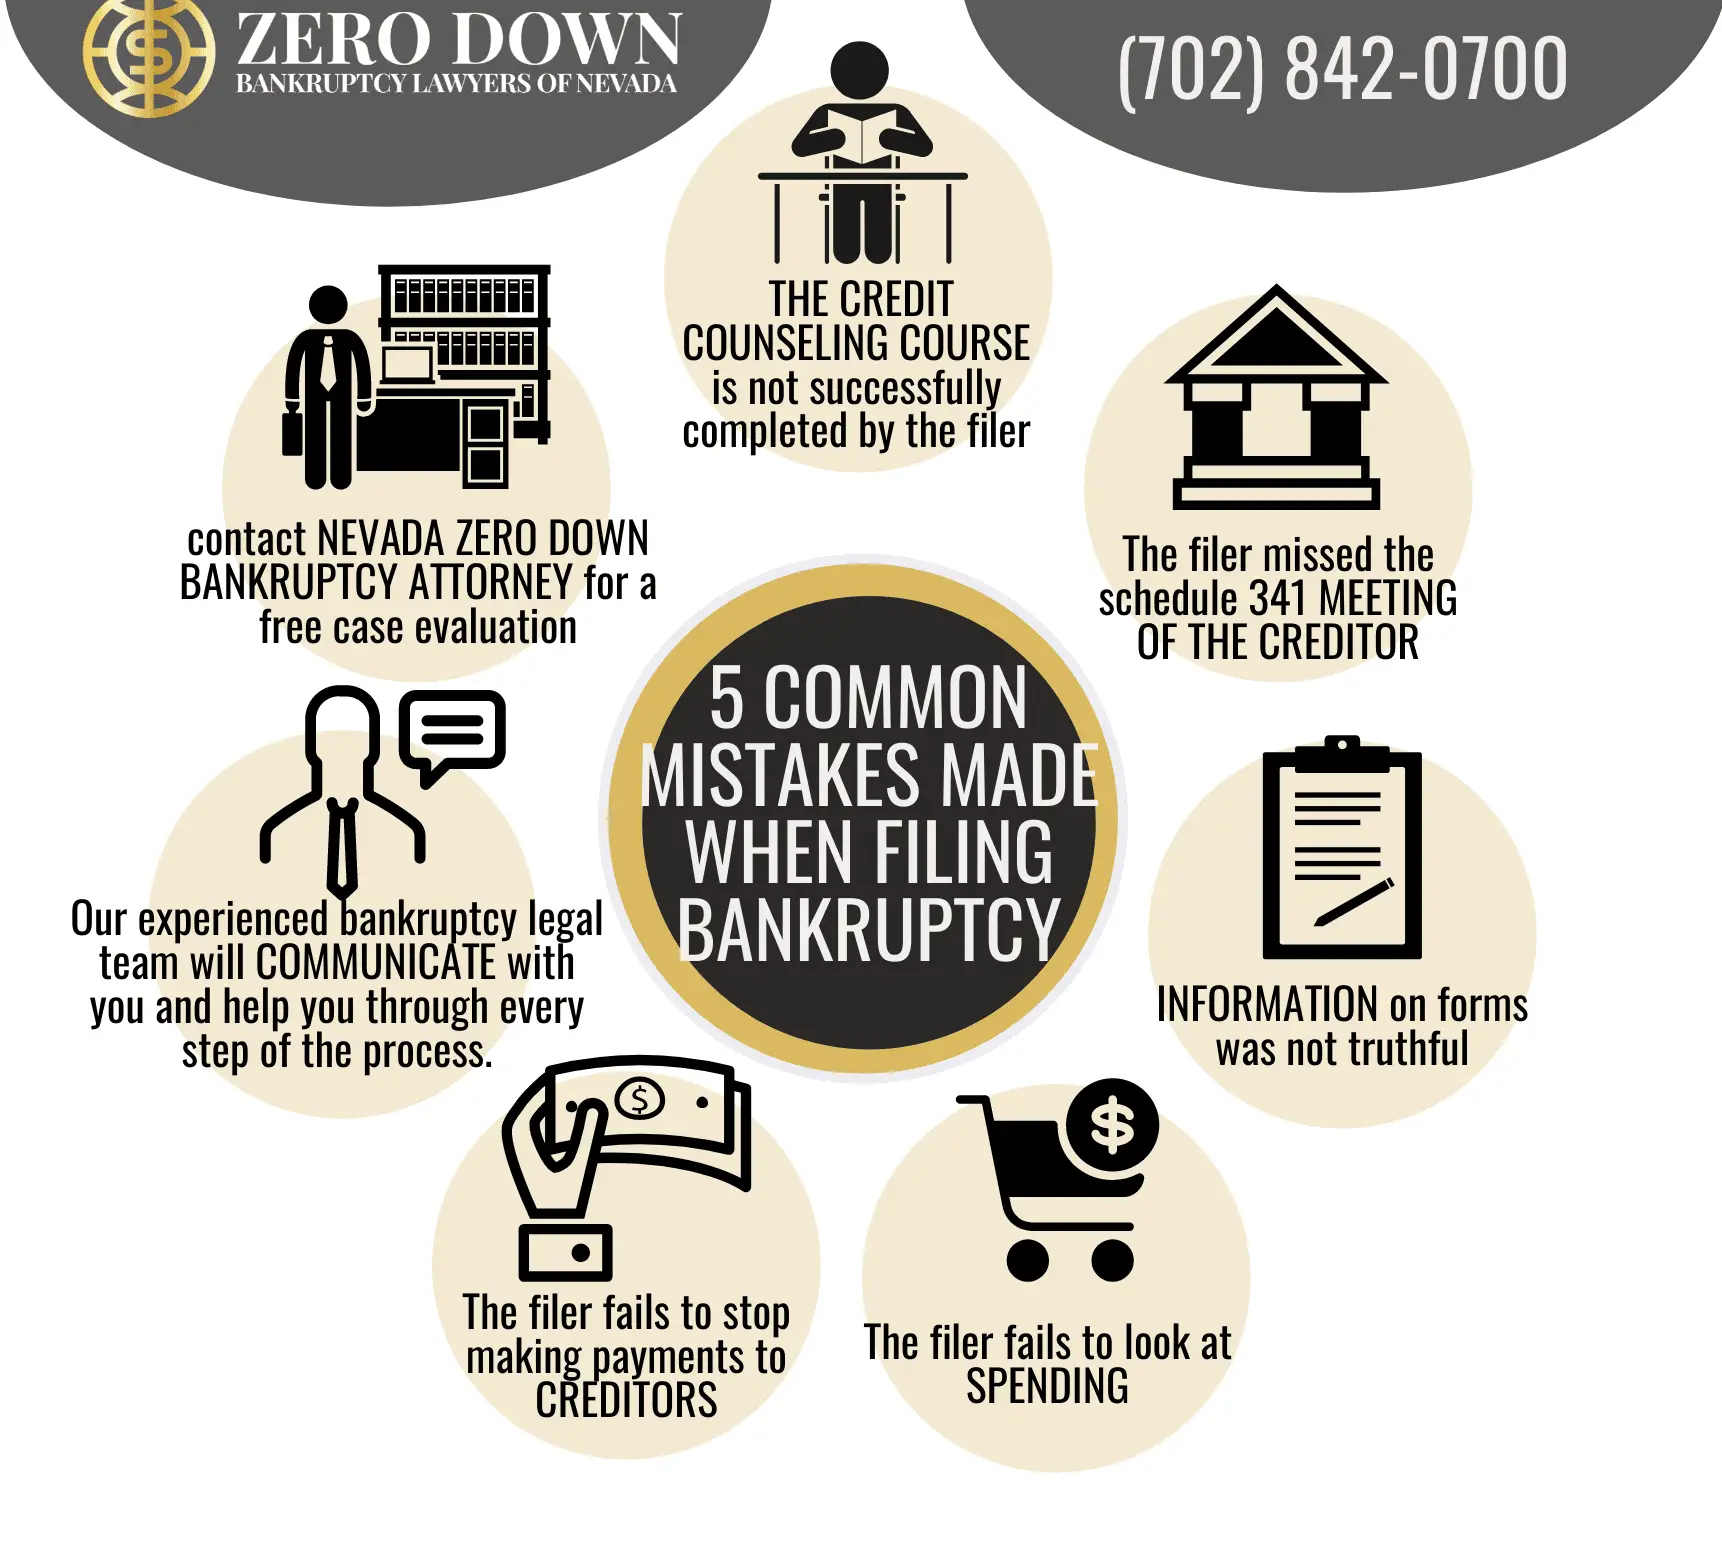 5 Things Not to Do When Filing Bankruptcy